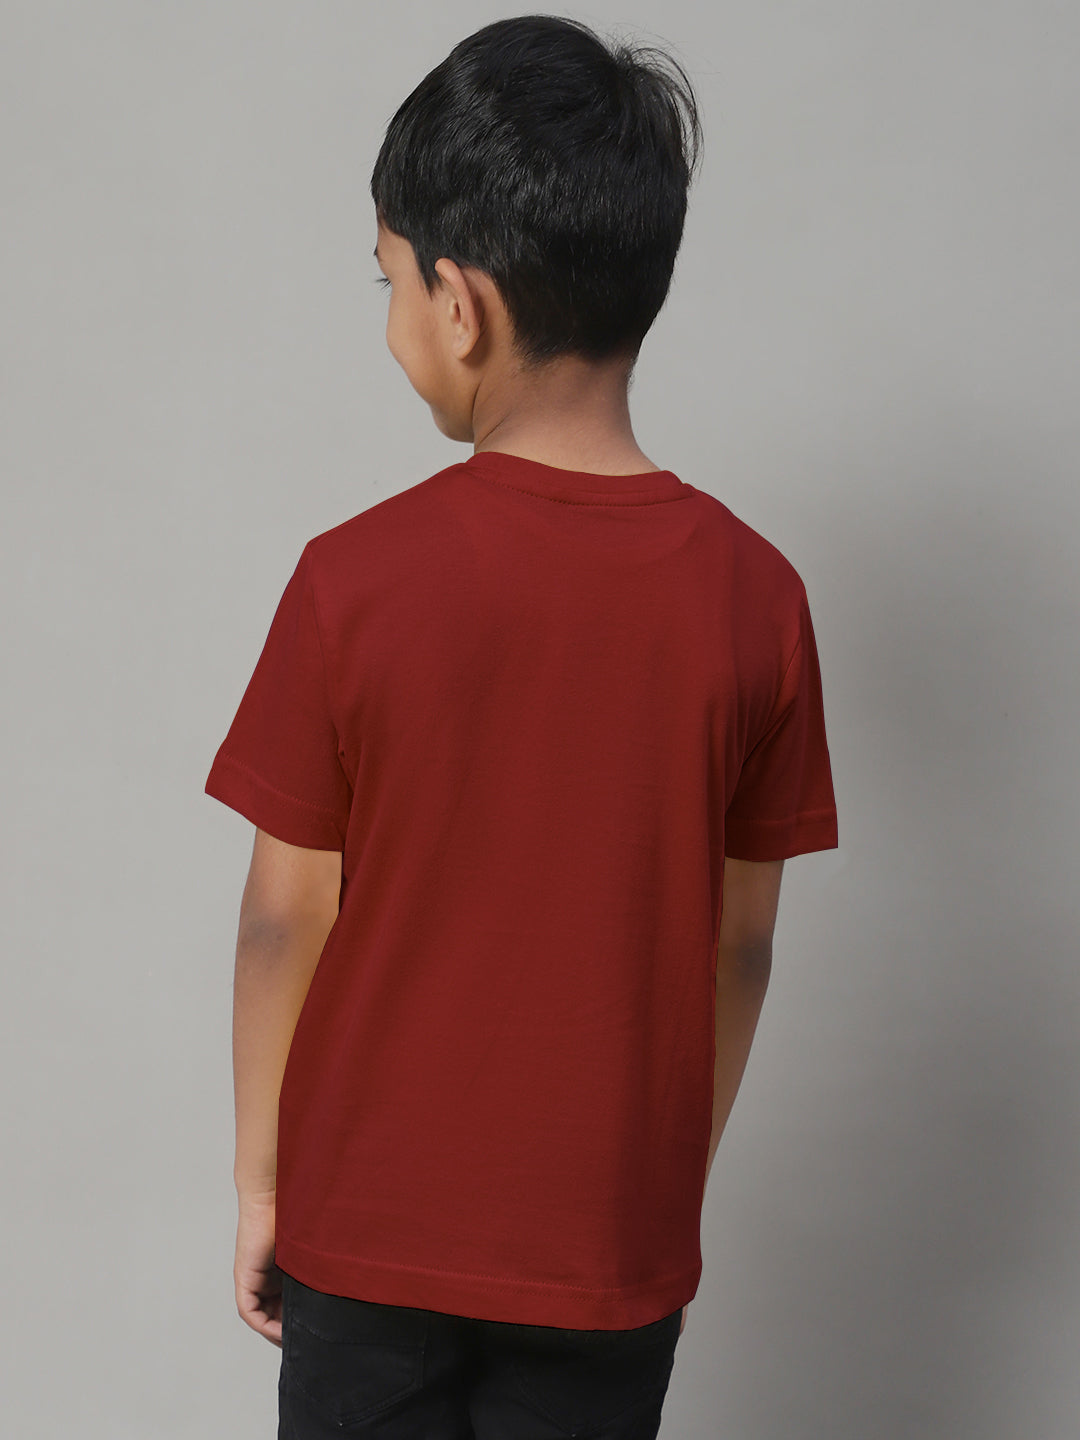 Boys Two Cool Half Sleeves Printed T-Shirt - Friskers